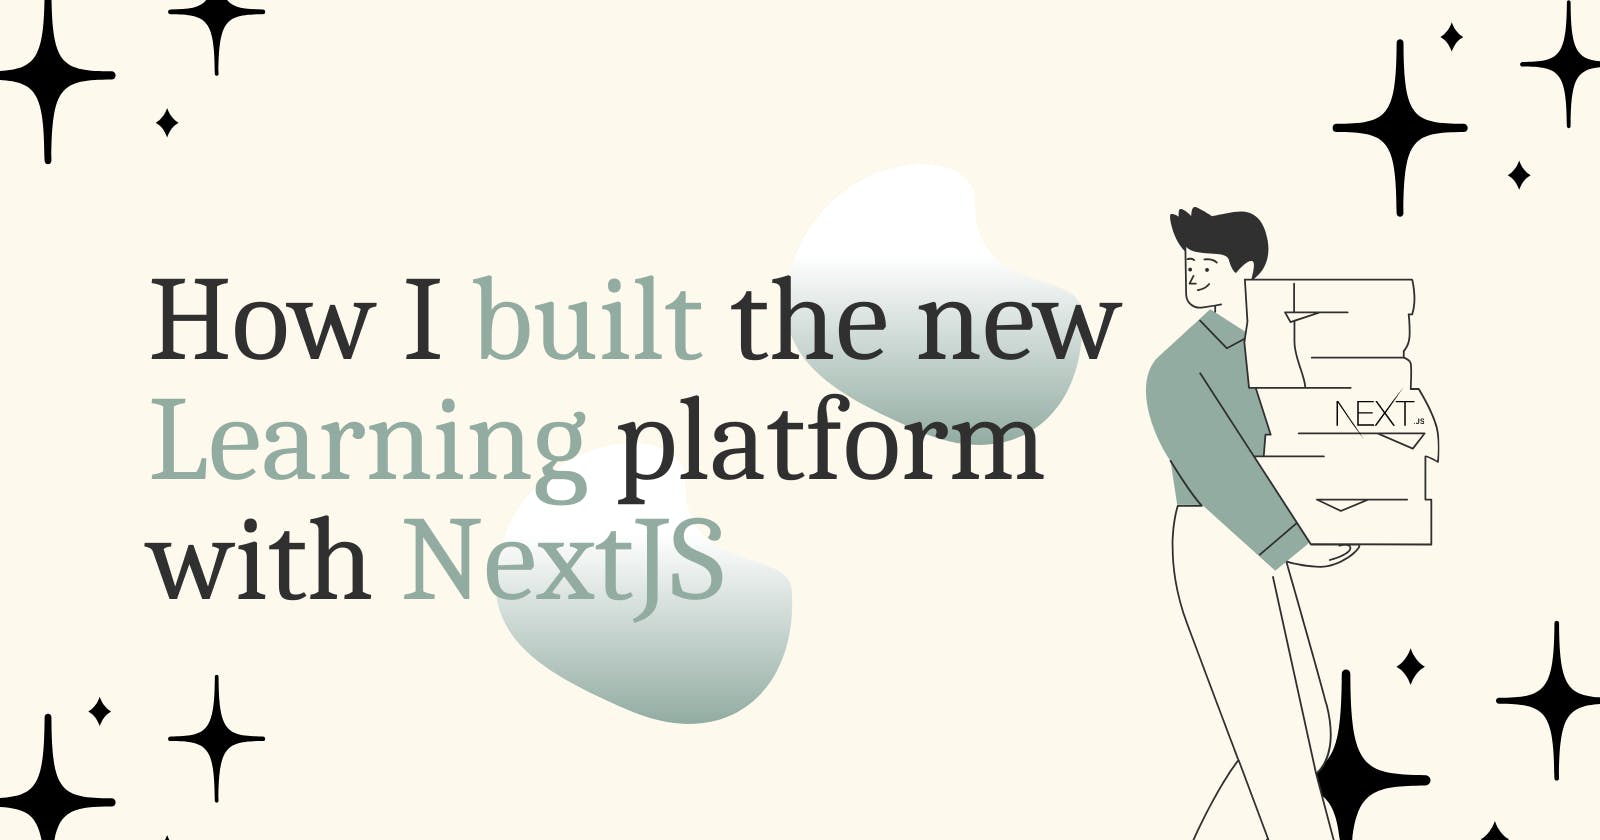 How I built the new Learning platform with NextJS